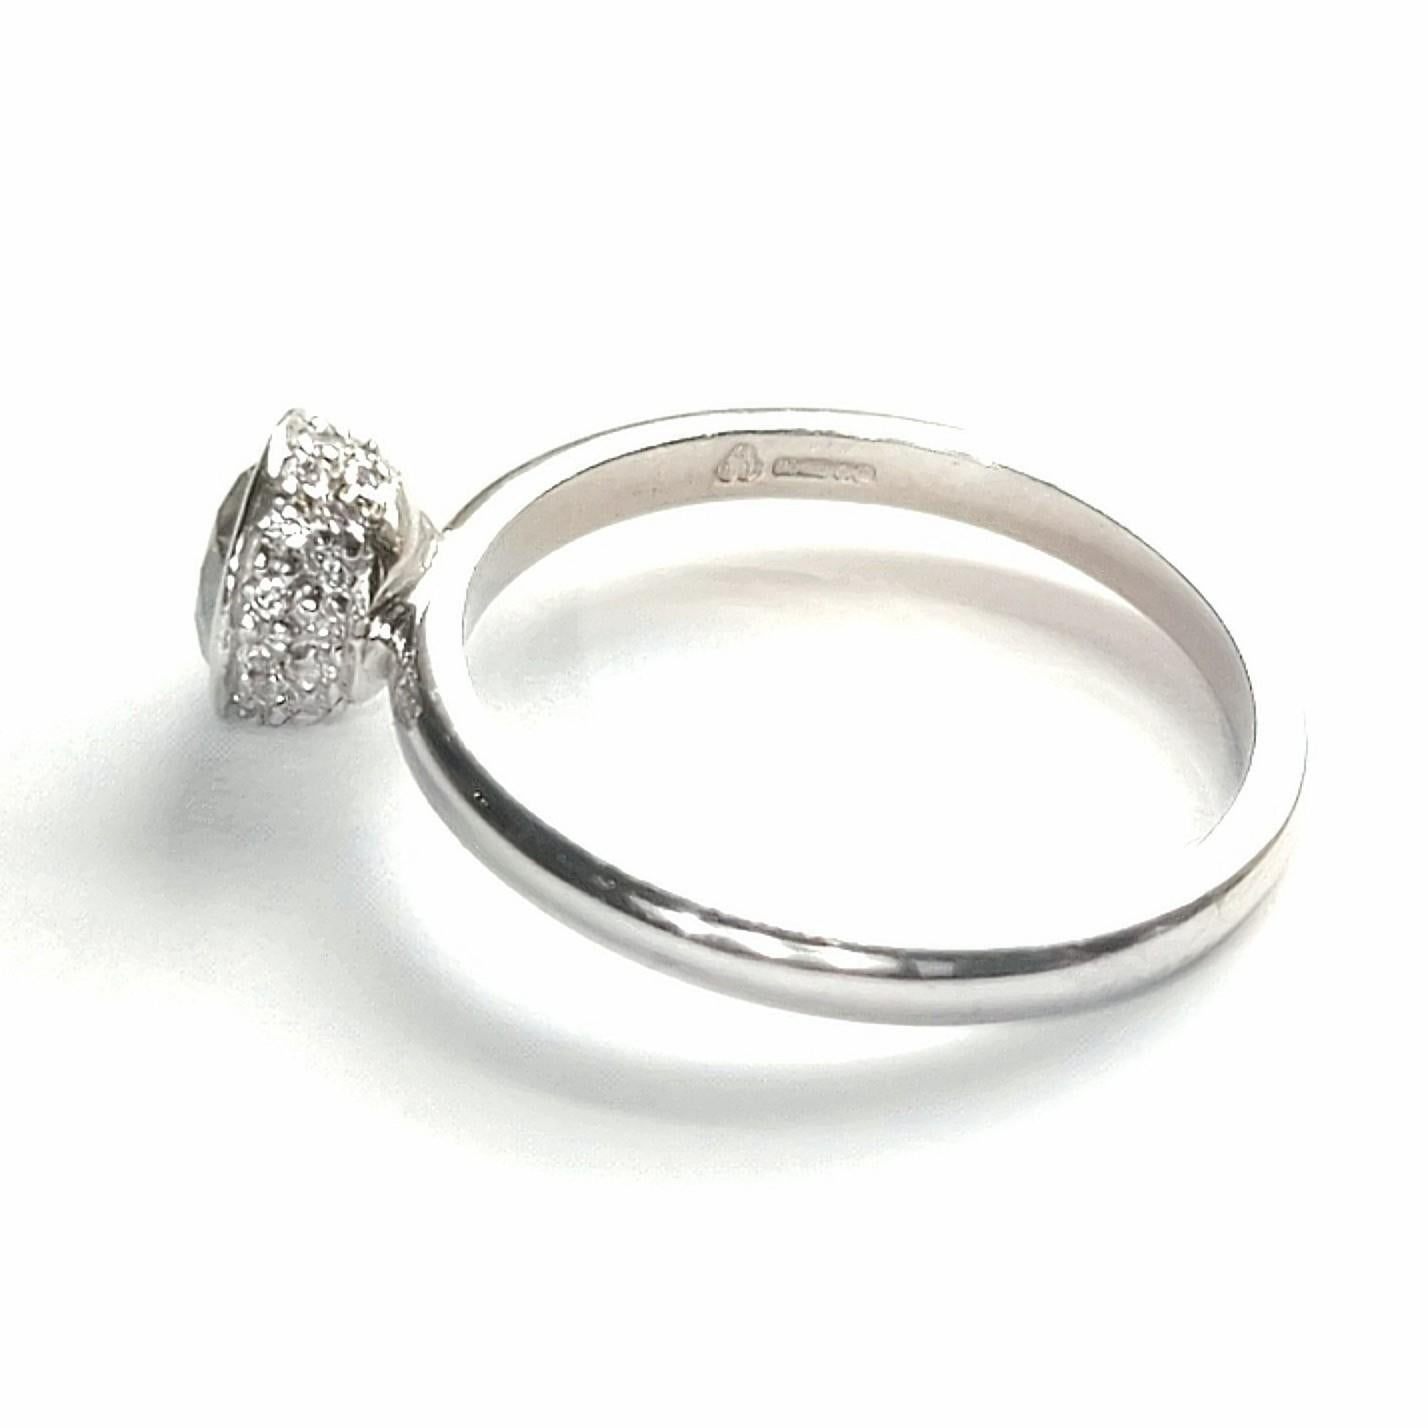 Brilliant Cut 18K White Gold Ring, Size O, 0.8ct Diamond AIG Certified Stone, Micro Pave For Sale